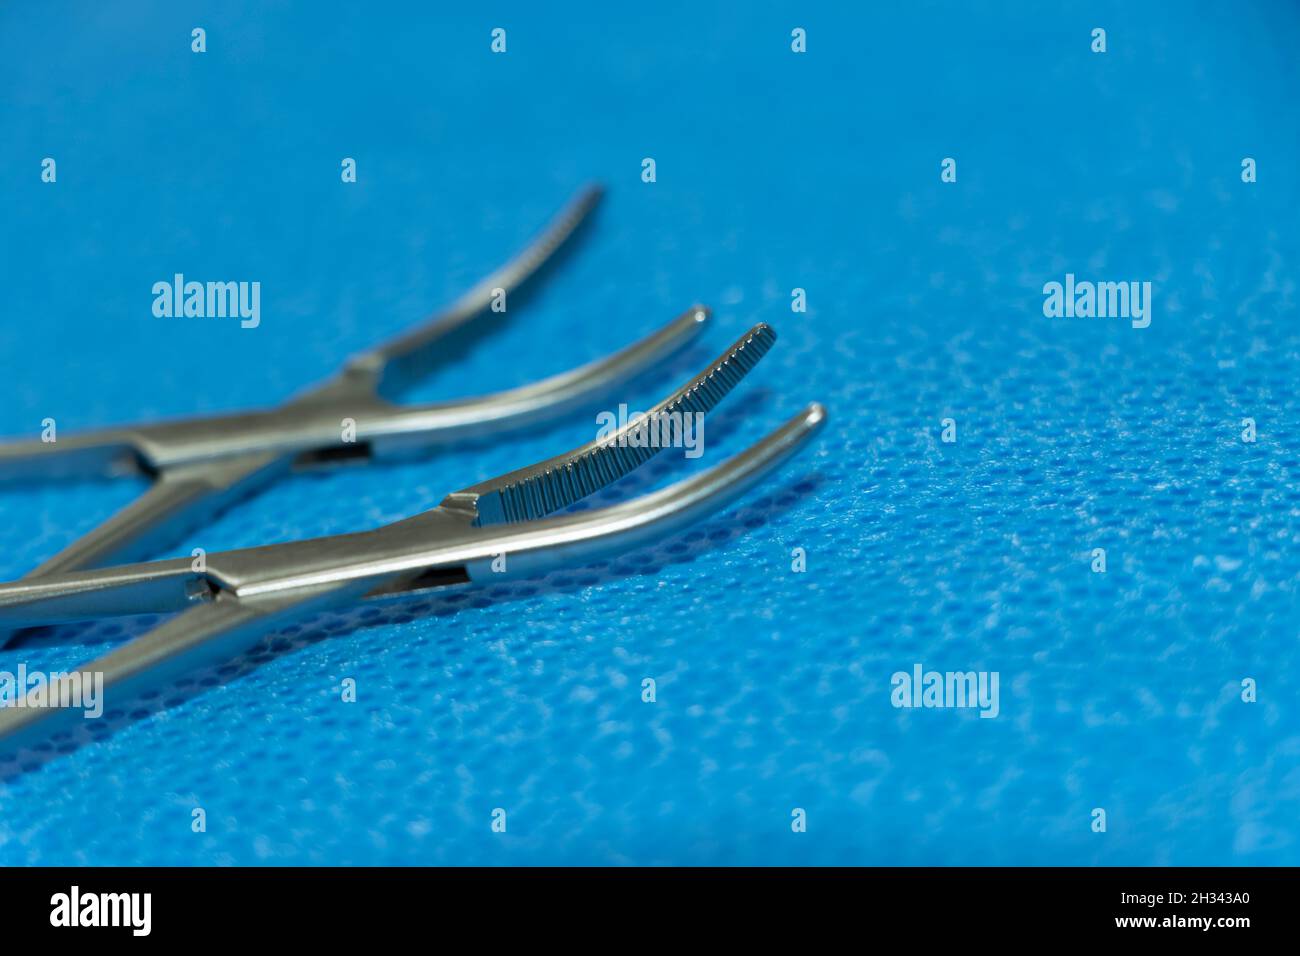 Closeup Image Of Hemostats Artery Forceps Tip In Blue Background. Selective Focus Stock Photo